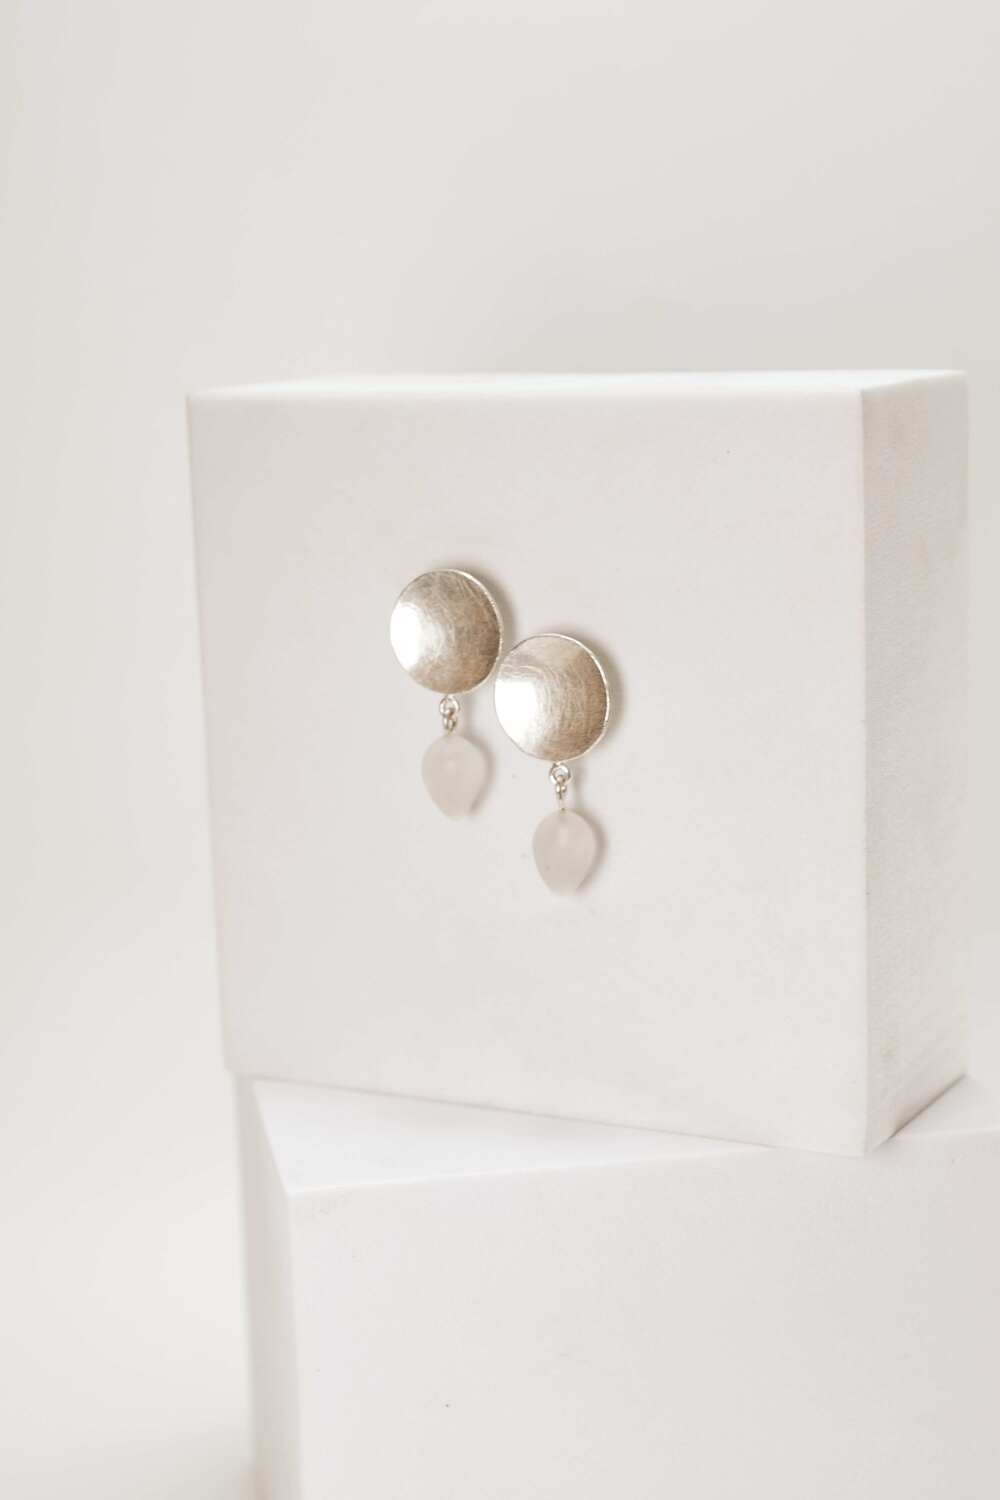 "Moonlight" Silver And Frosted Quartz Drop Earrings, Small Lotus Buds